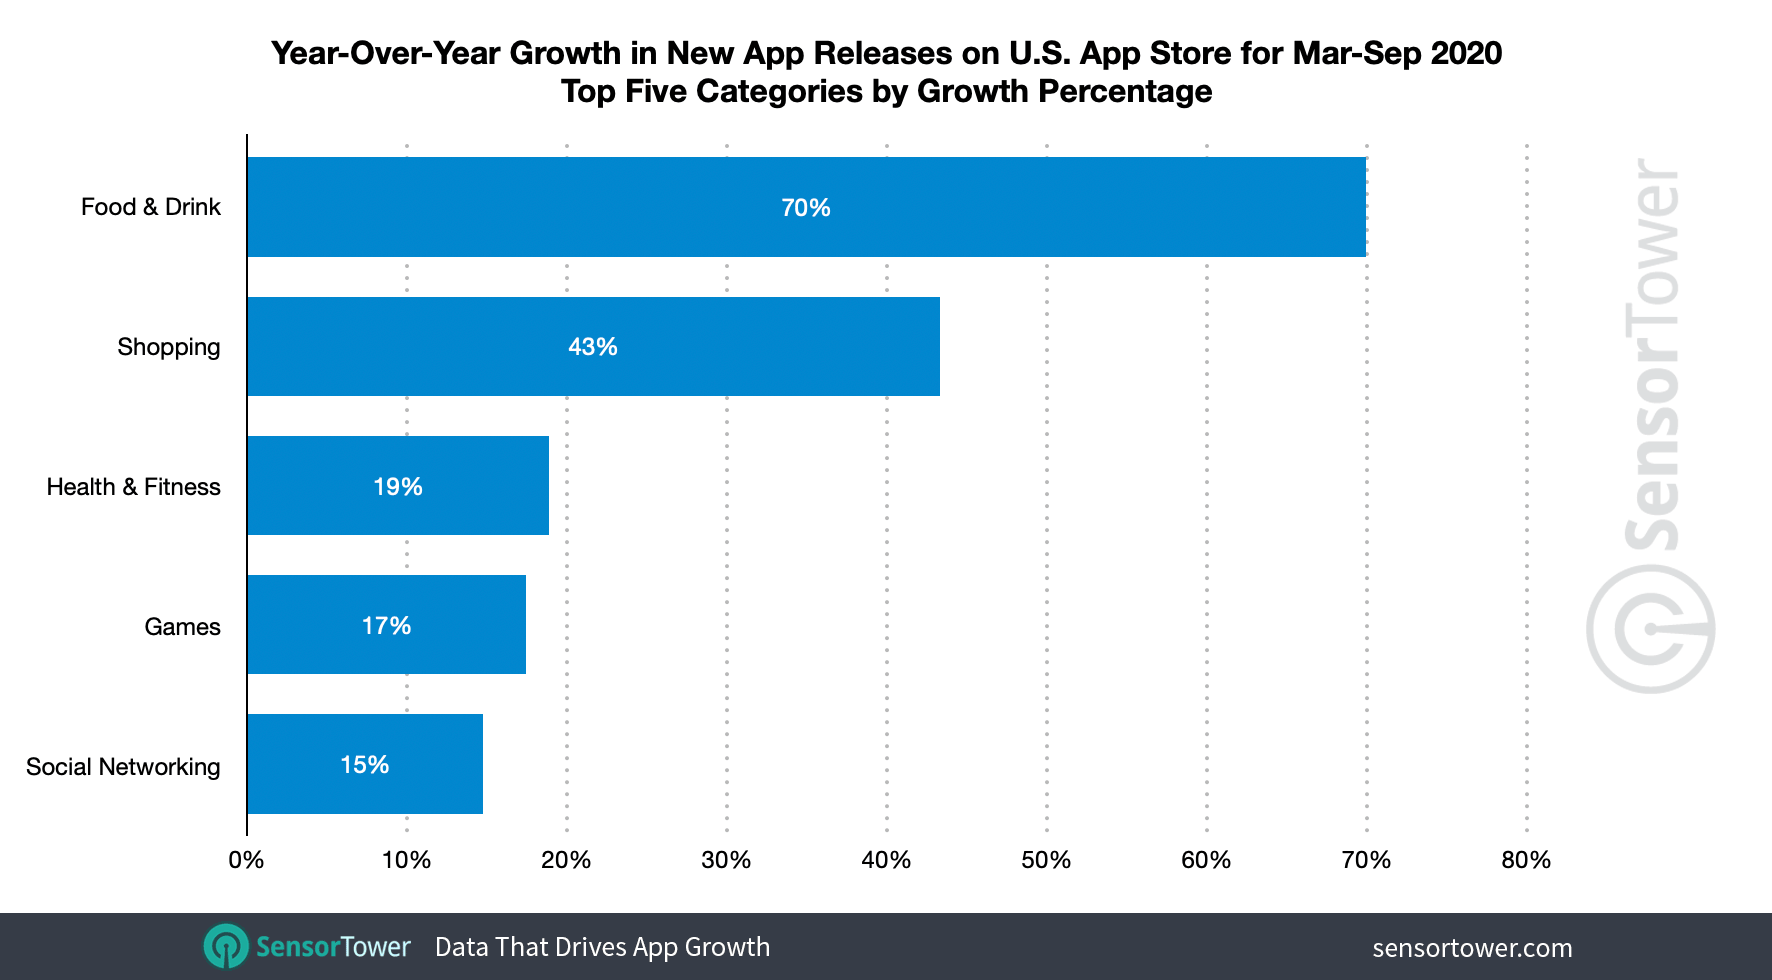 Category breakdown of new apps launched on Apple's App Store in the U.S.